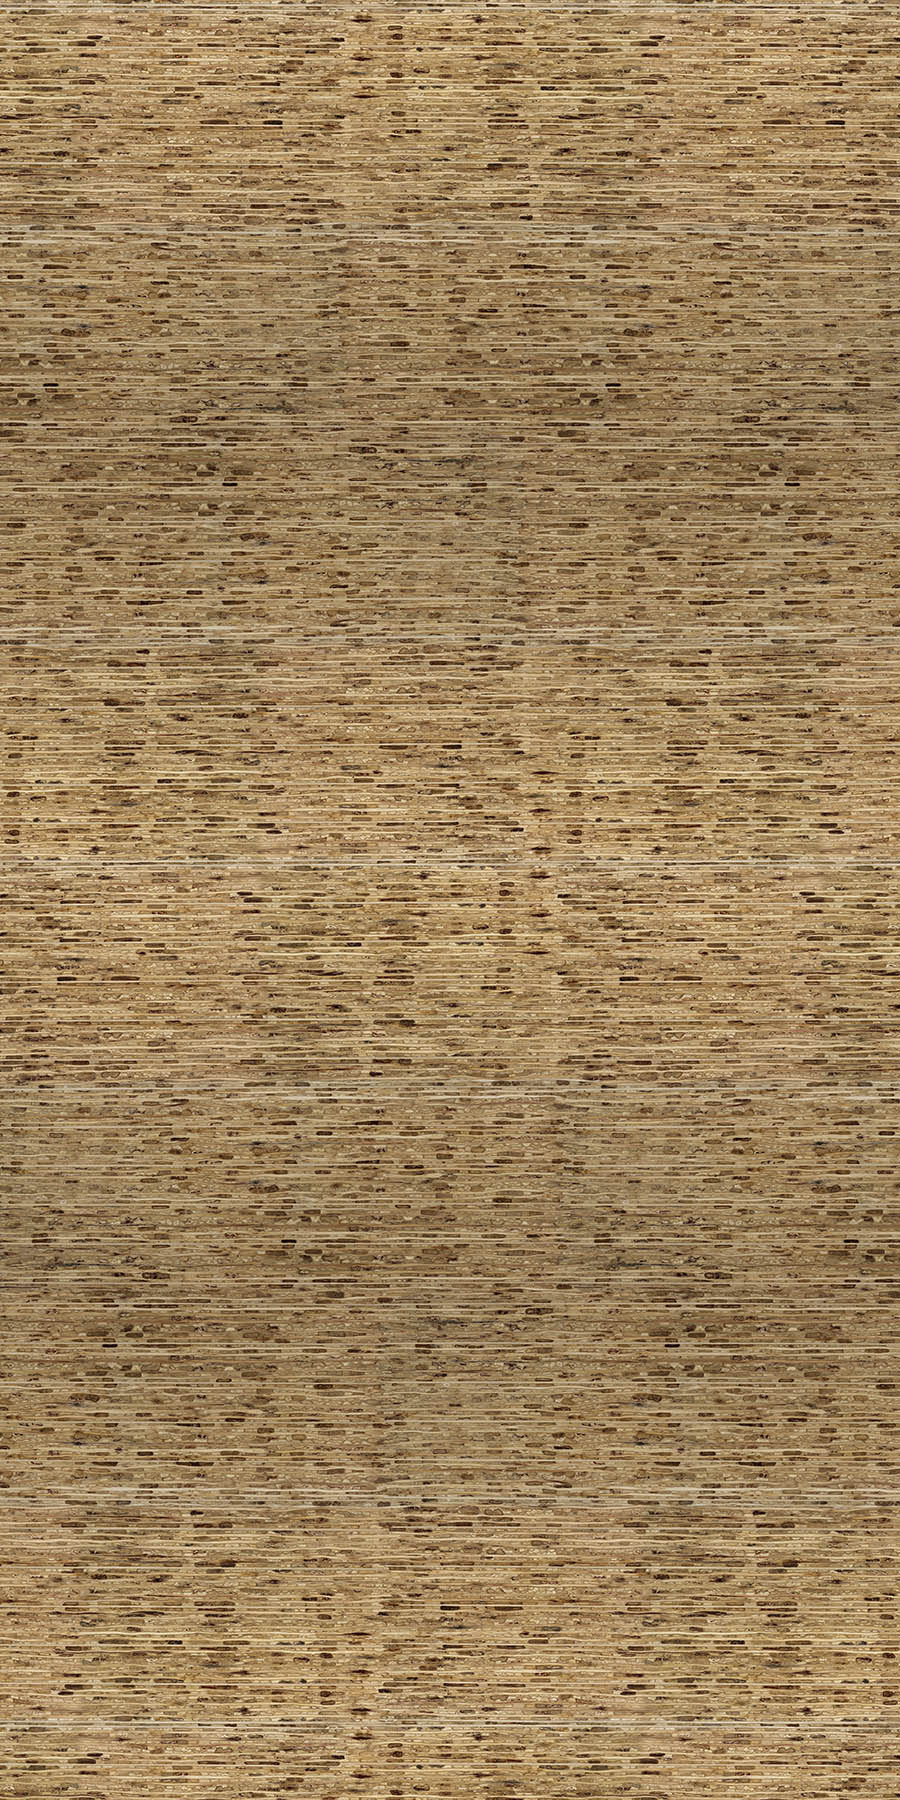 Reeds Compressed Natural 4' x 8' Panels (Fusion, Wood Collection)